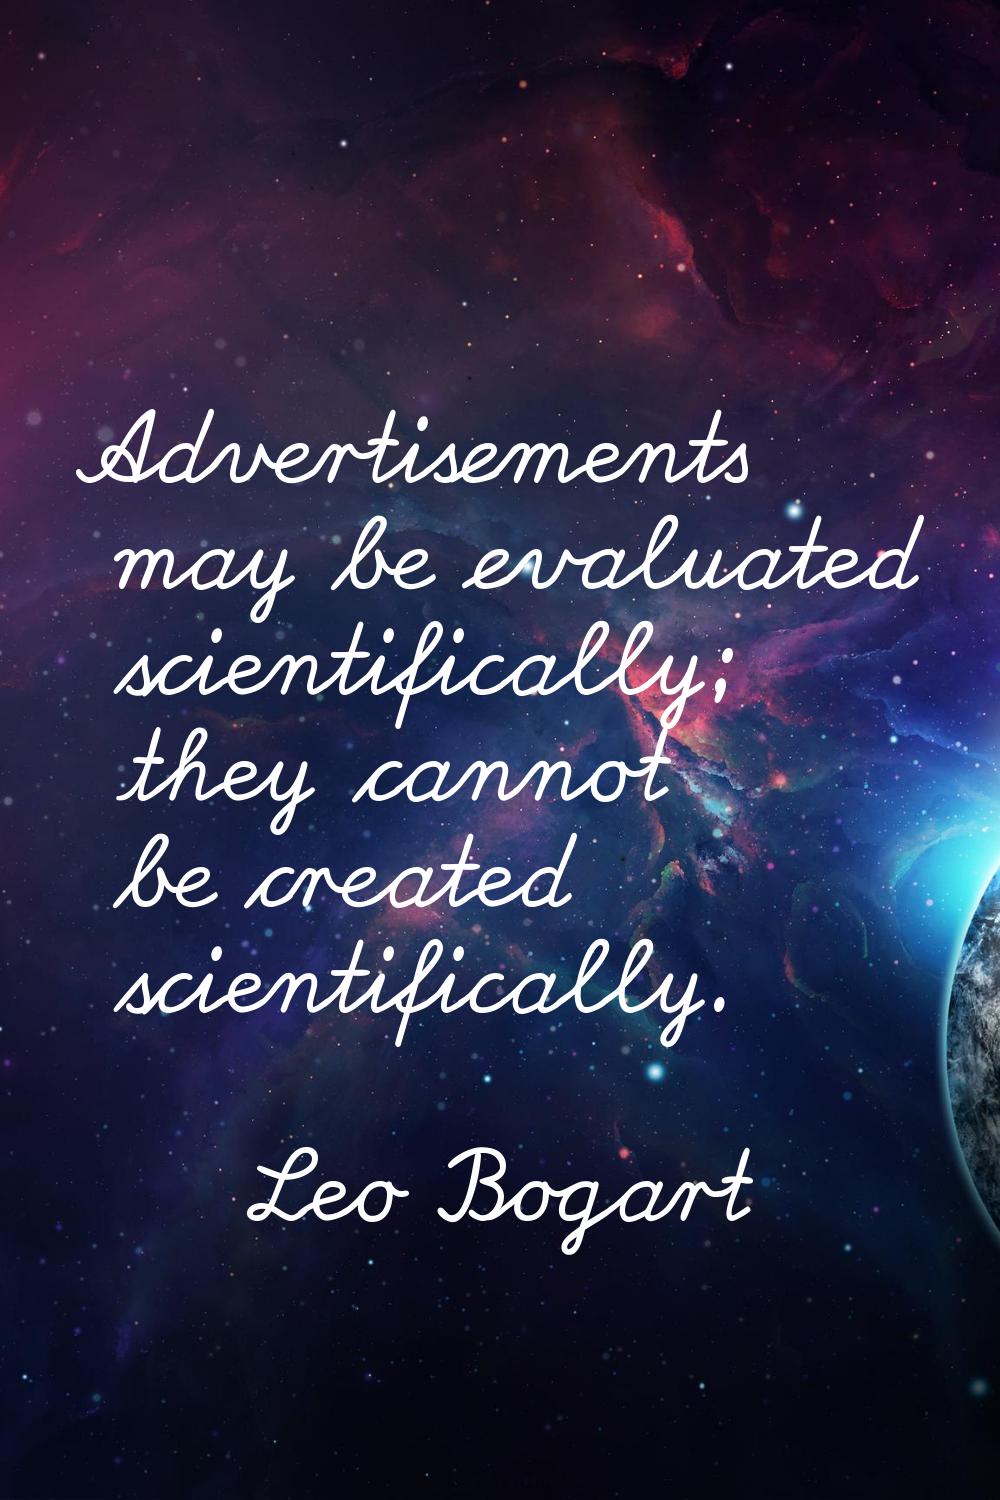 Advertisements may be evaluated scientifically; they cannot be created scientifically.